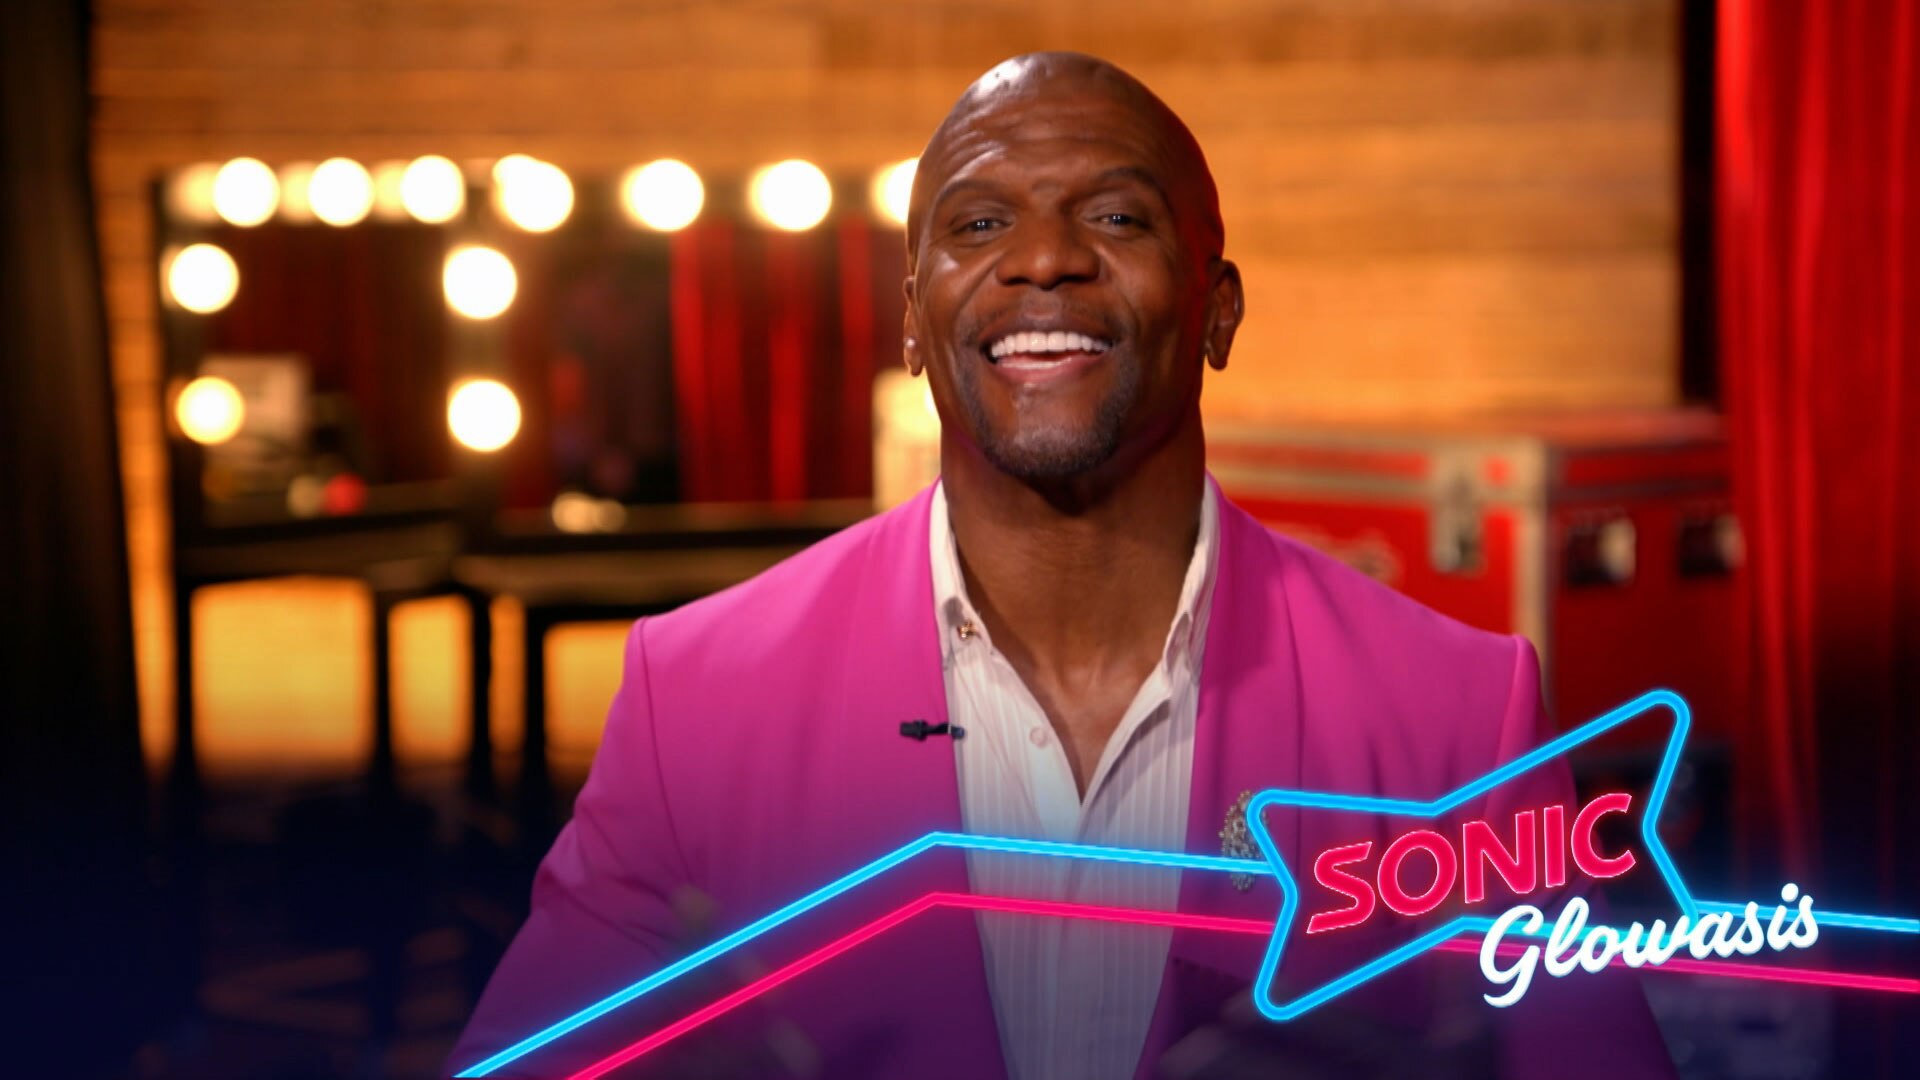 Watch America's Got Talent Web Exclusive Shine Bright in the SONIC